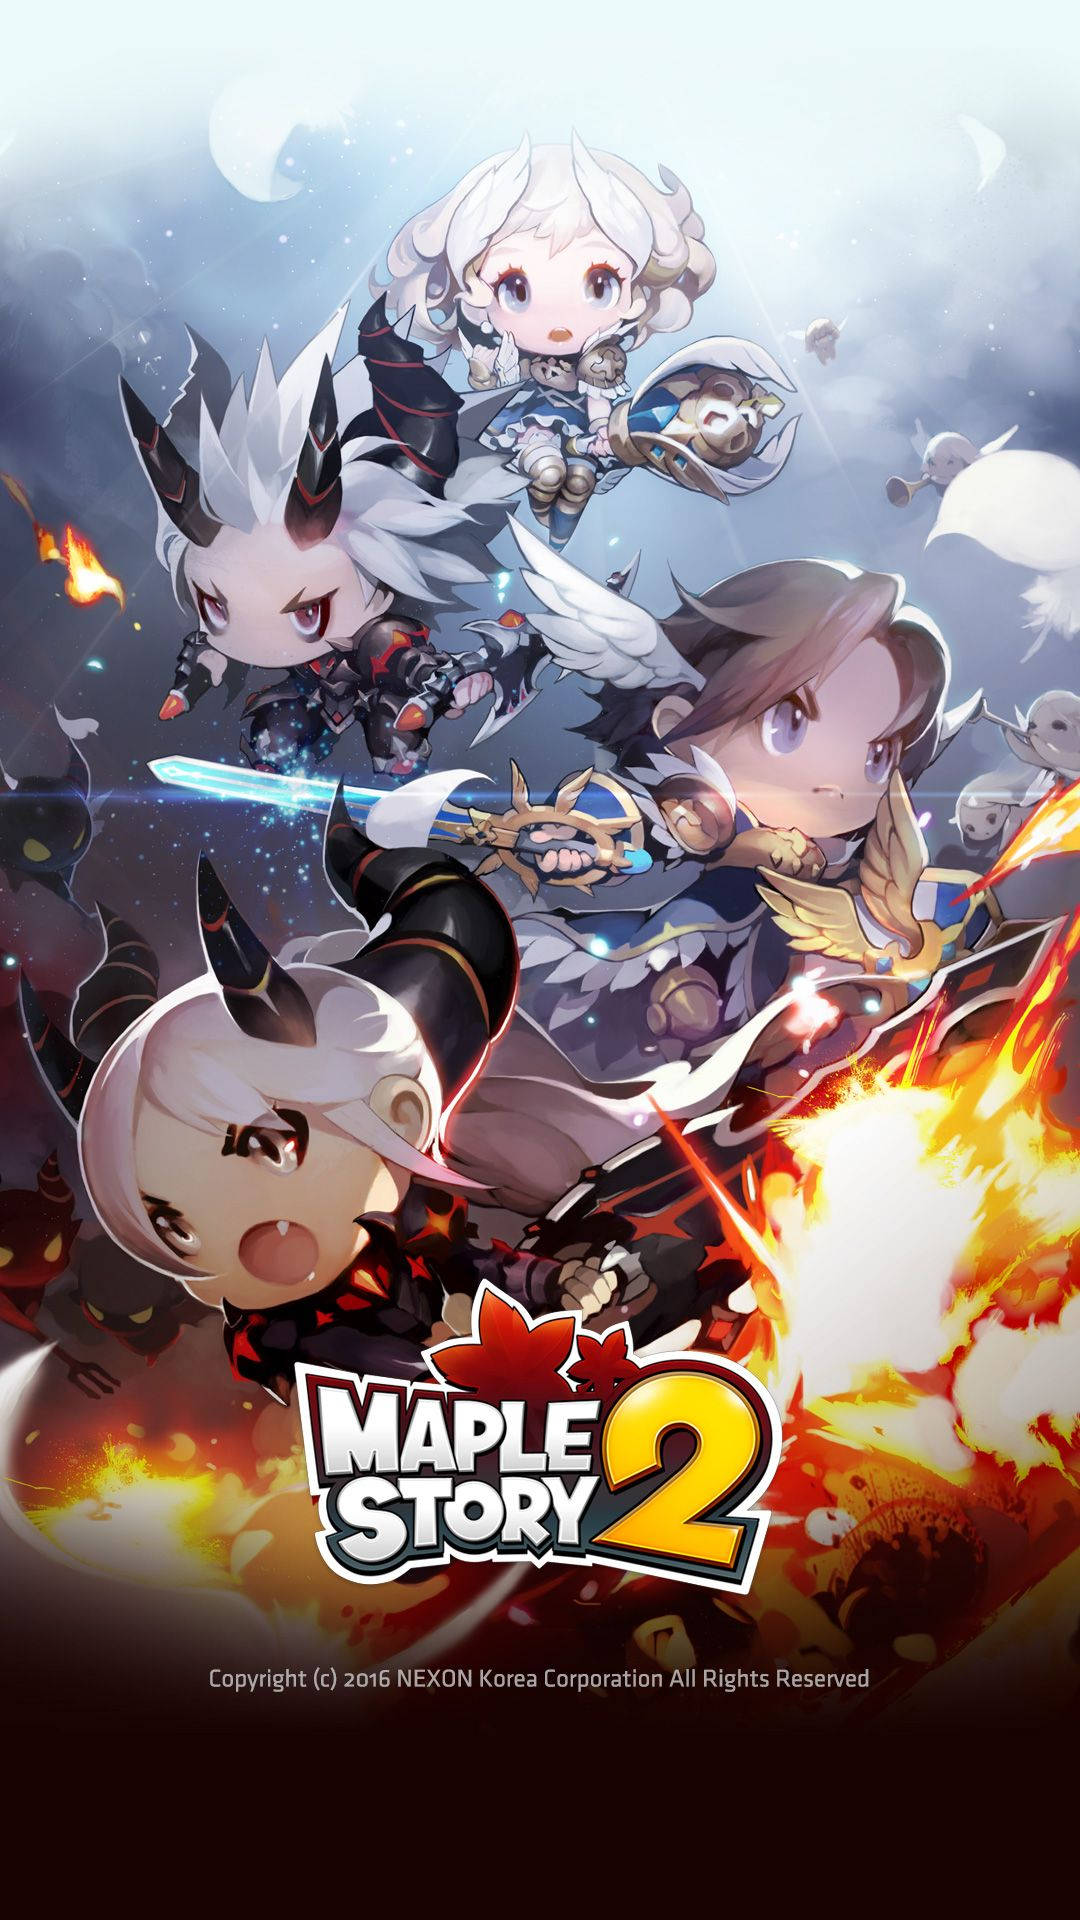 Get ready for an adventure with Maplestory 2 Wallpaper